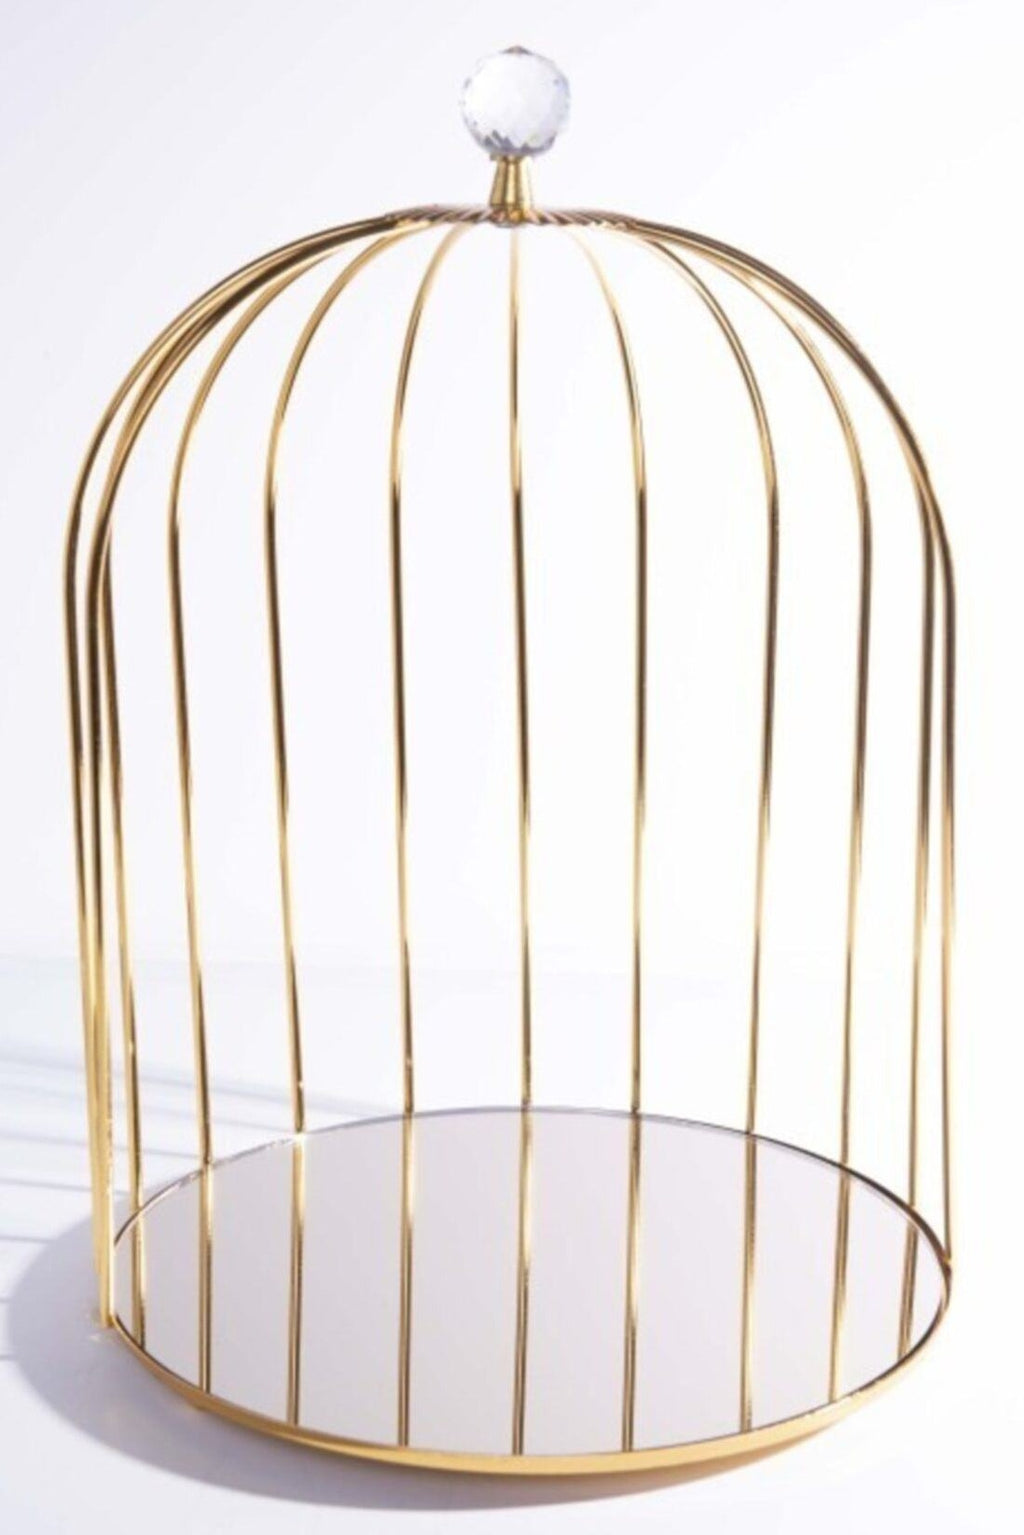 Cookies Golden Cage Stand